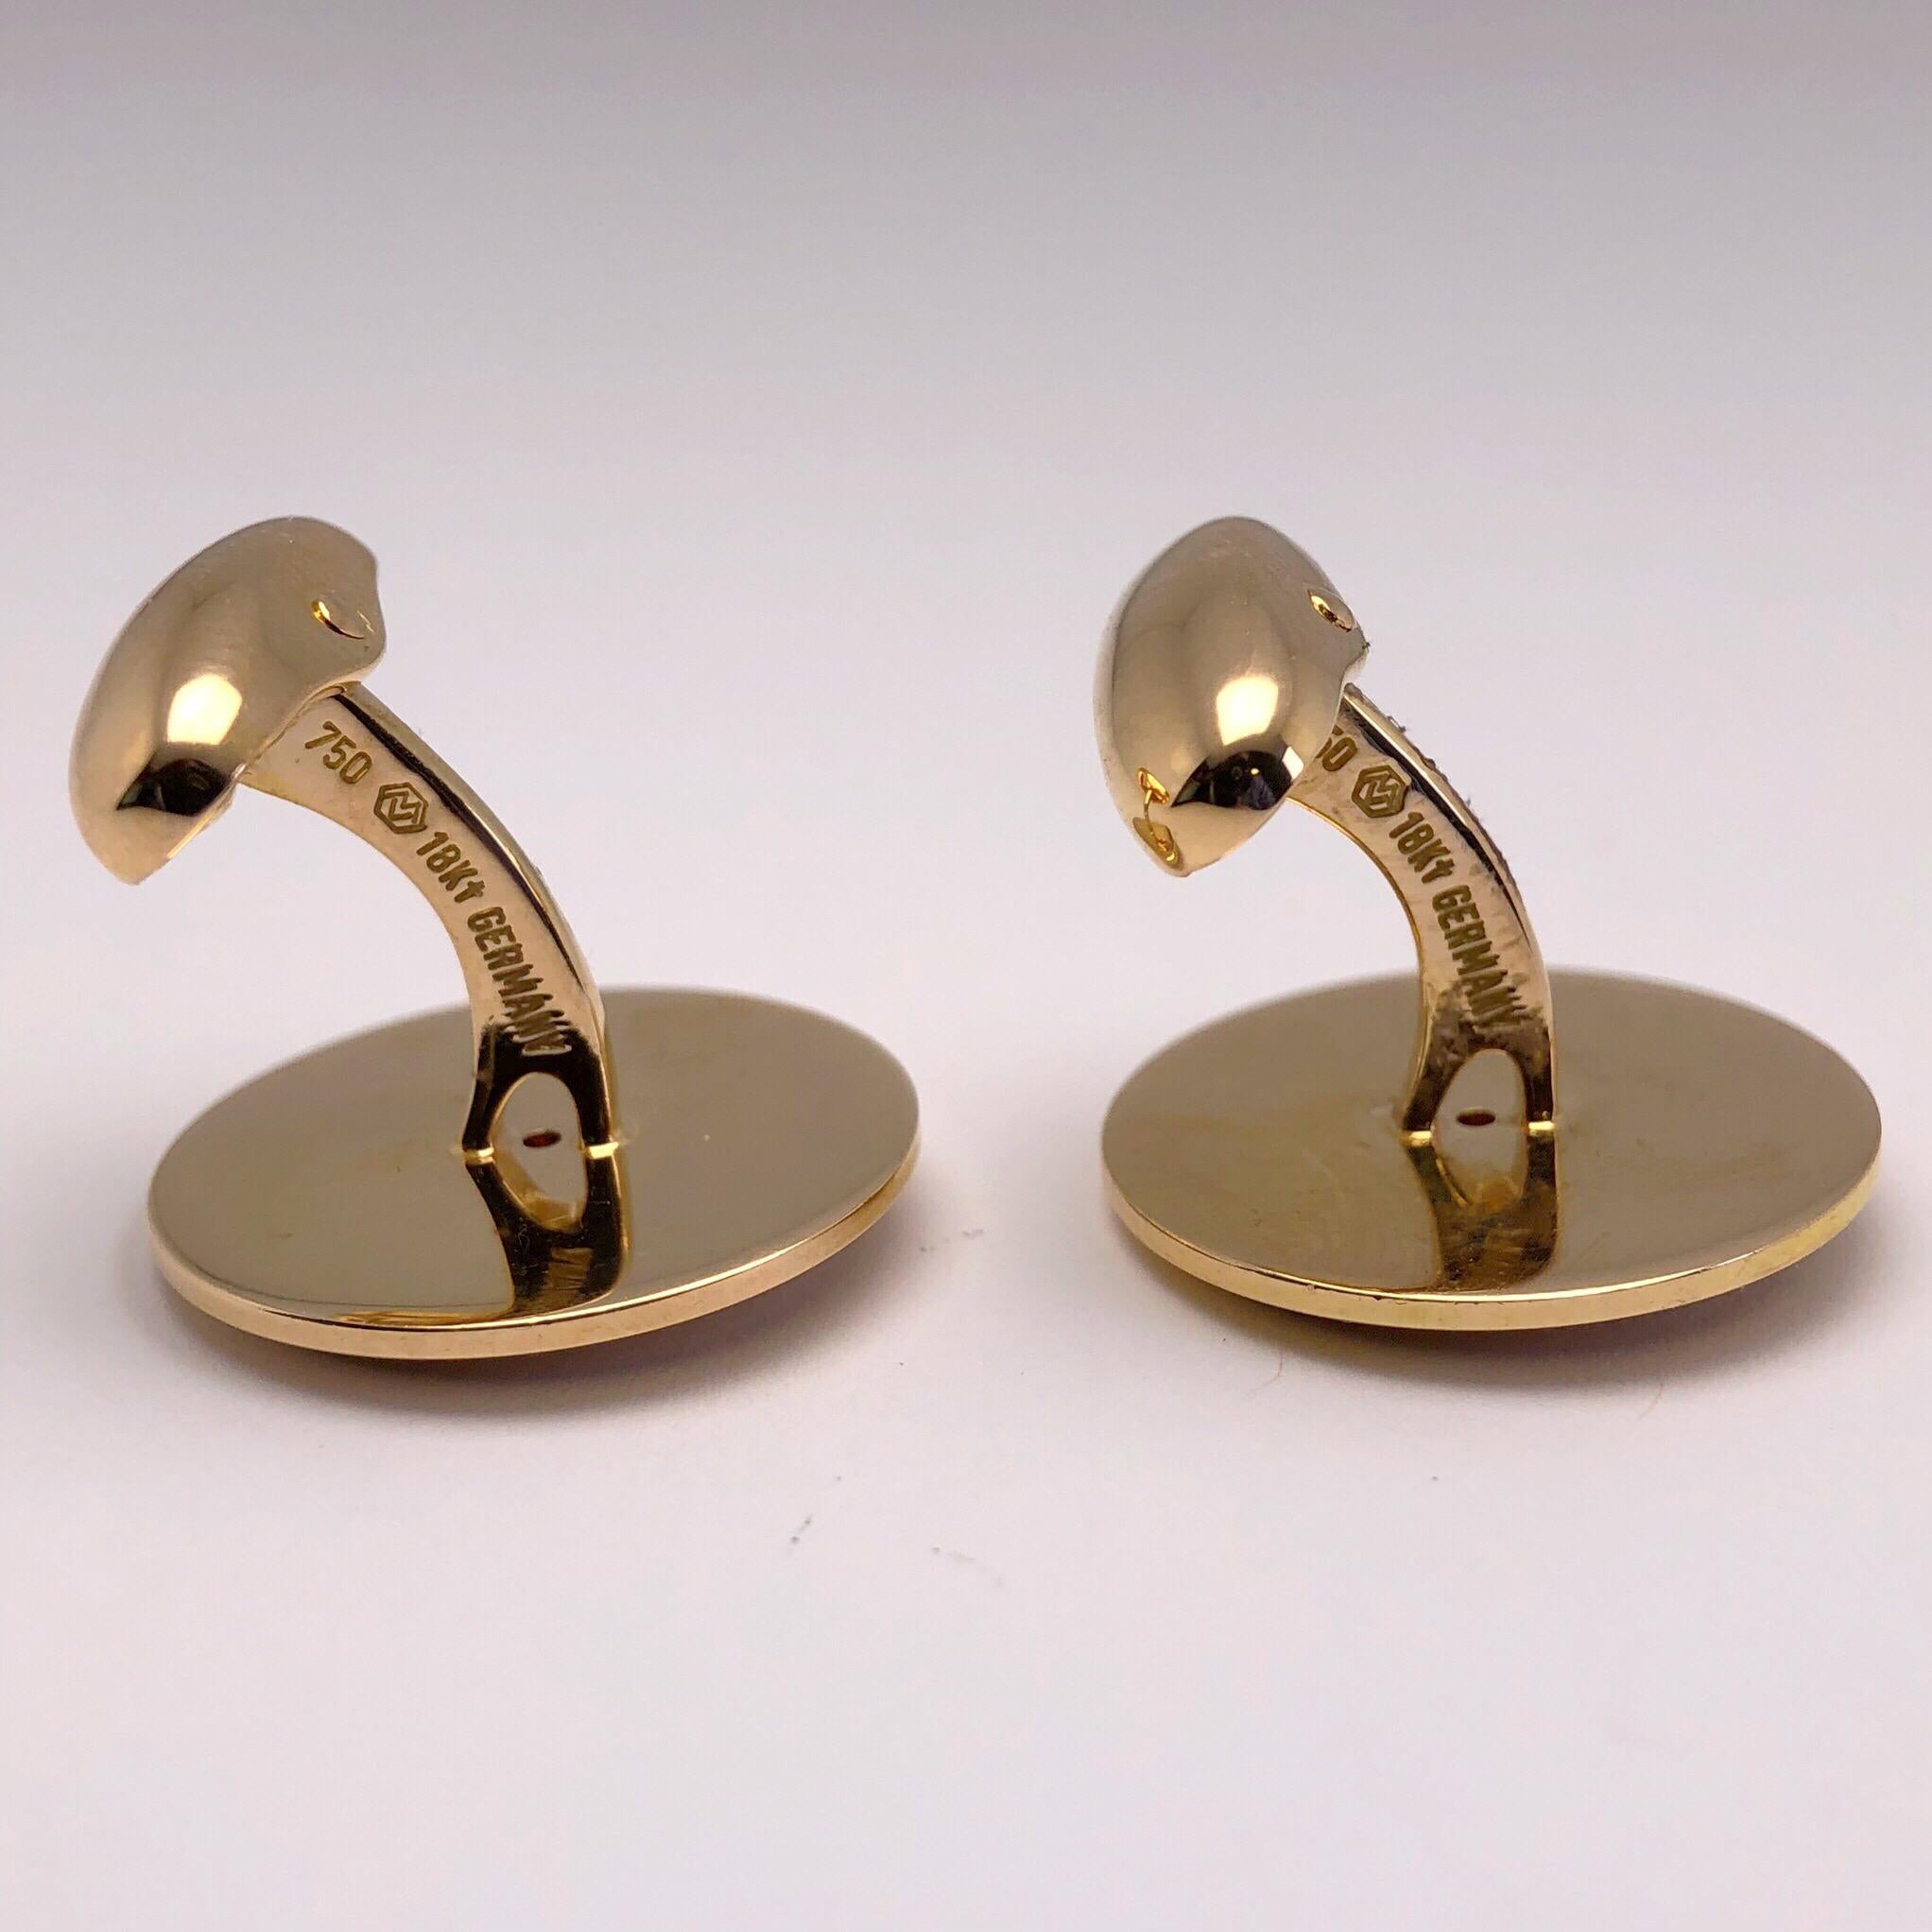 These classic Faberge 18 karat rose gold cuff links have been hand polished with a satin and shiny swirl finish. Each cuff link has a round brilliant diamond center in a bezel setting. 
Total diamond weight 0.14cts. Limited edition #44/500
The